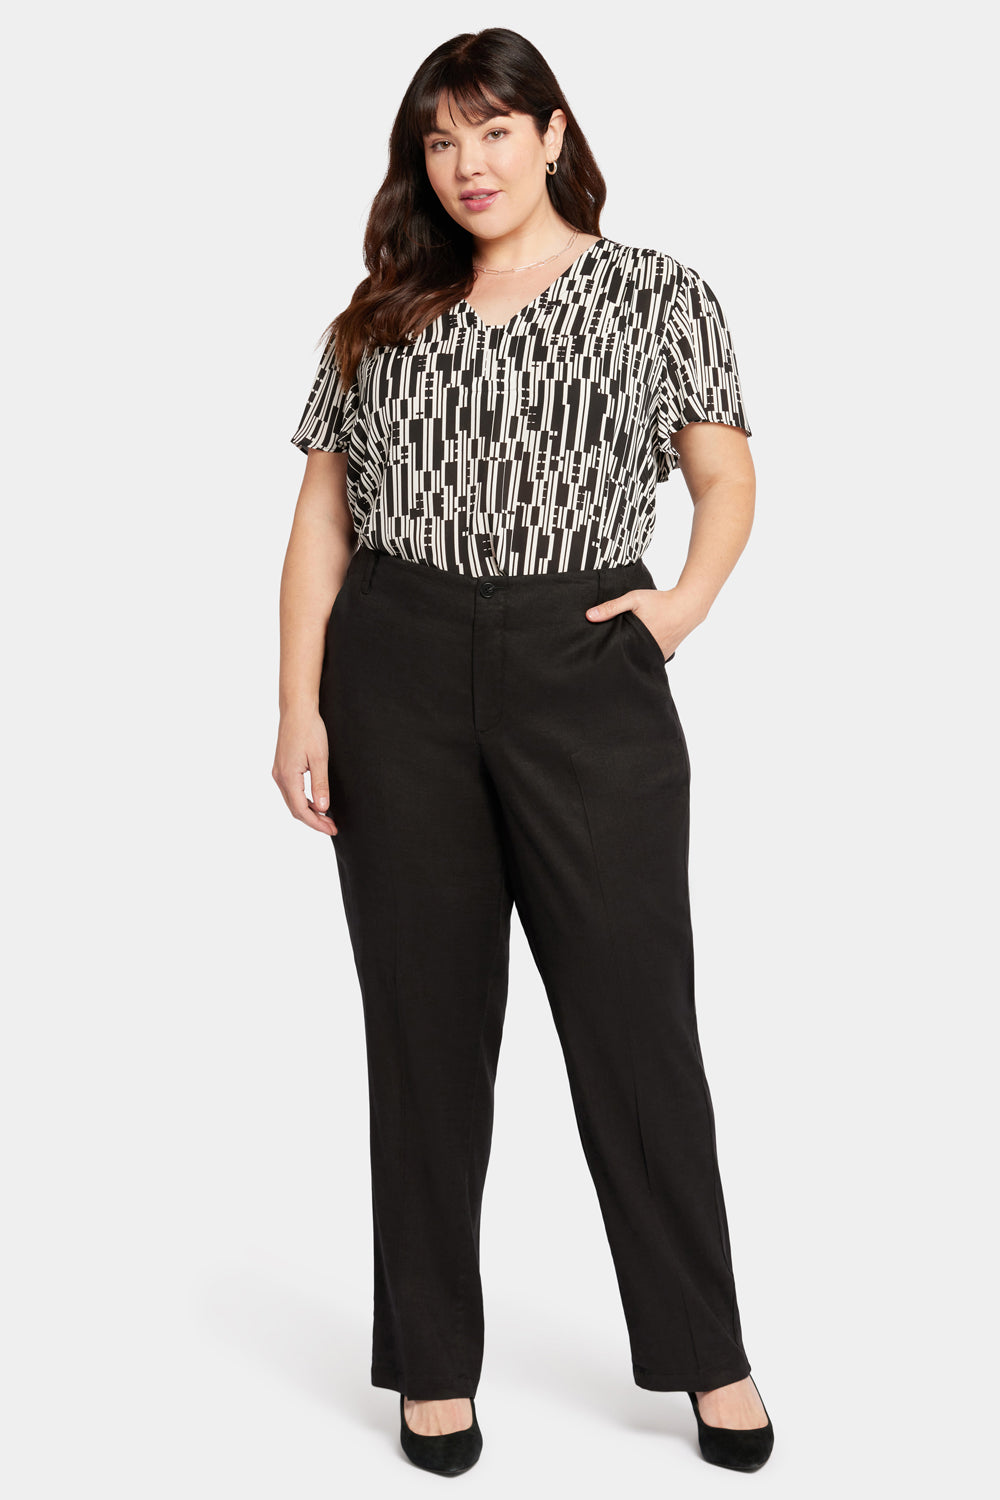 Clothing & Shoes - Bottoms - Pants - NYDJ Marilyn Straight 5